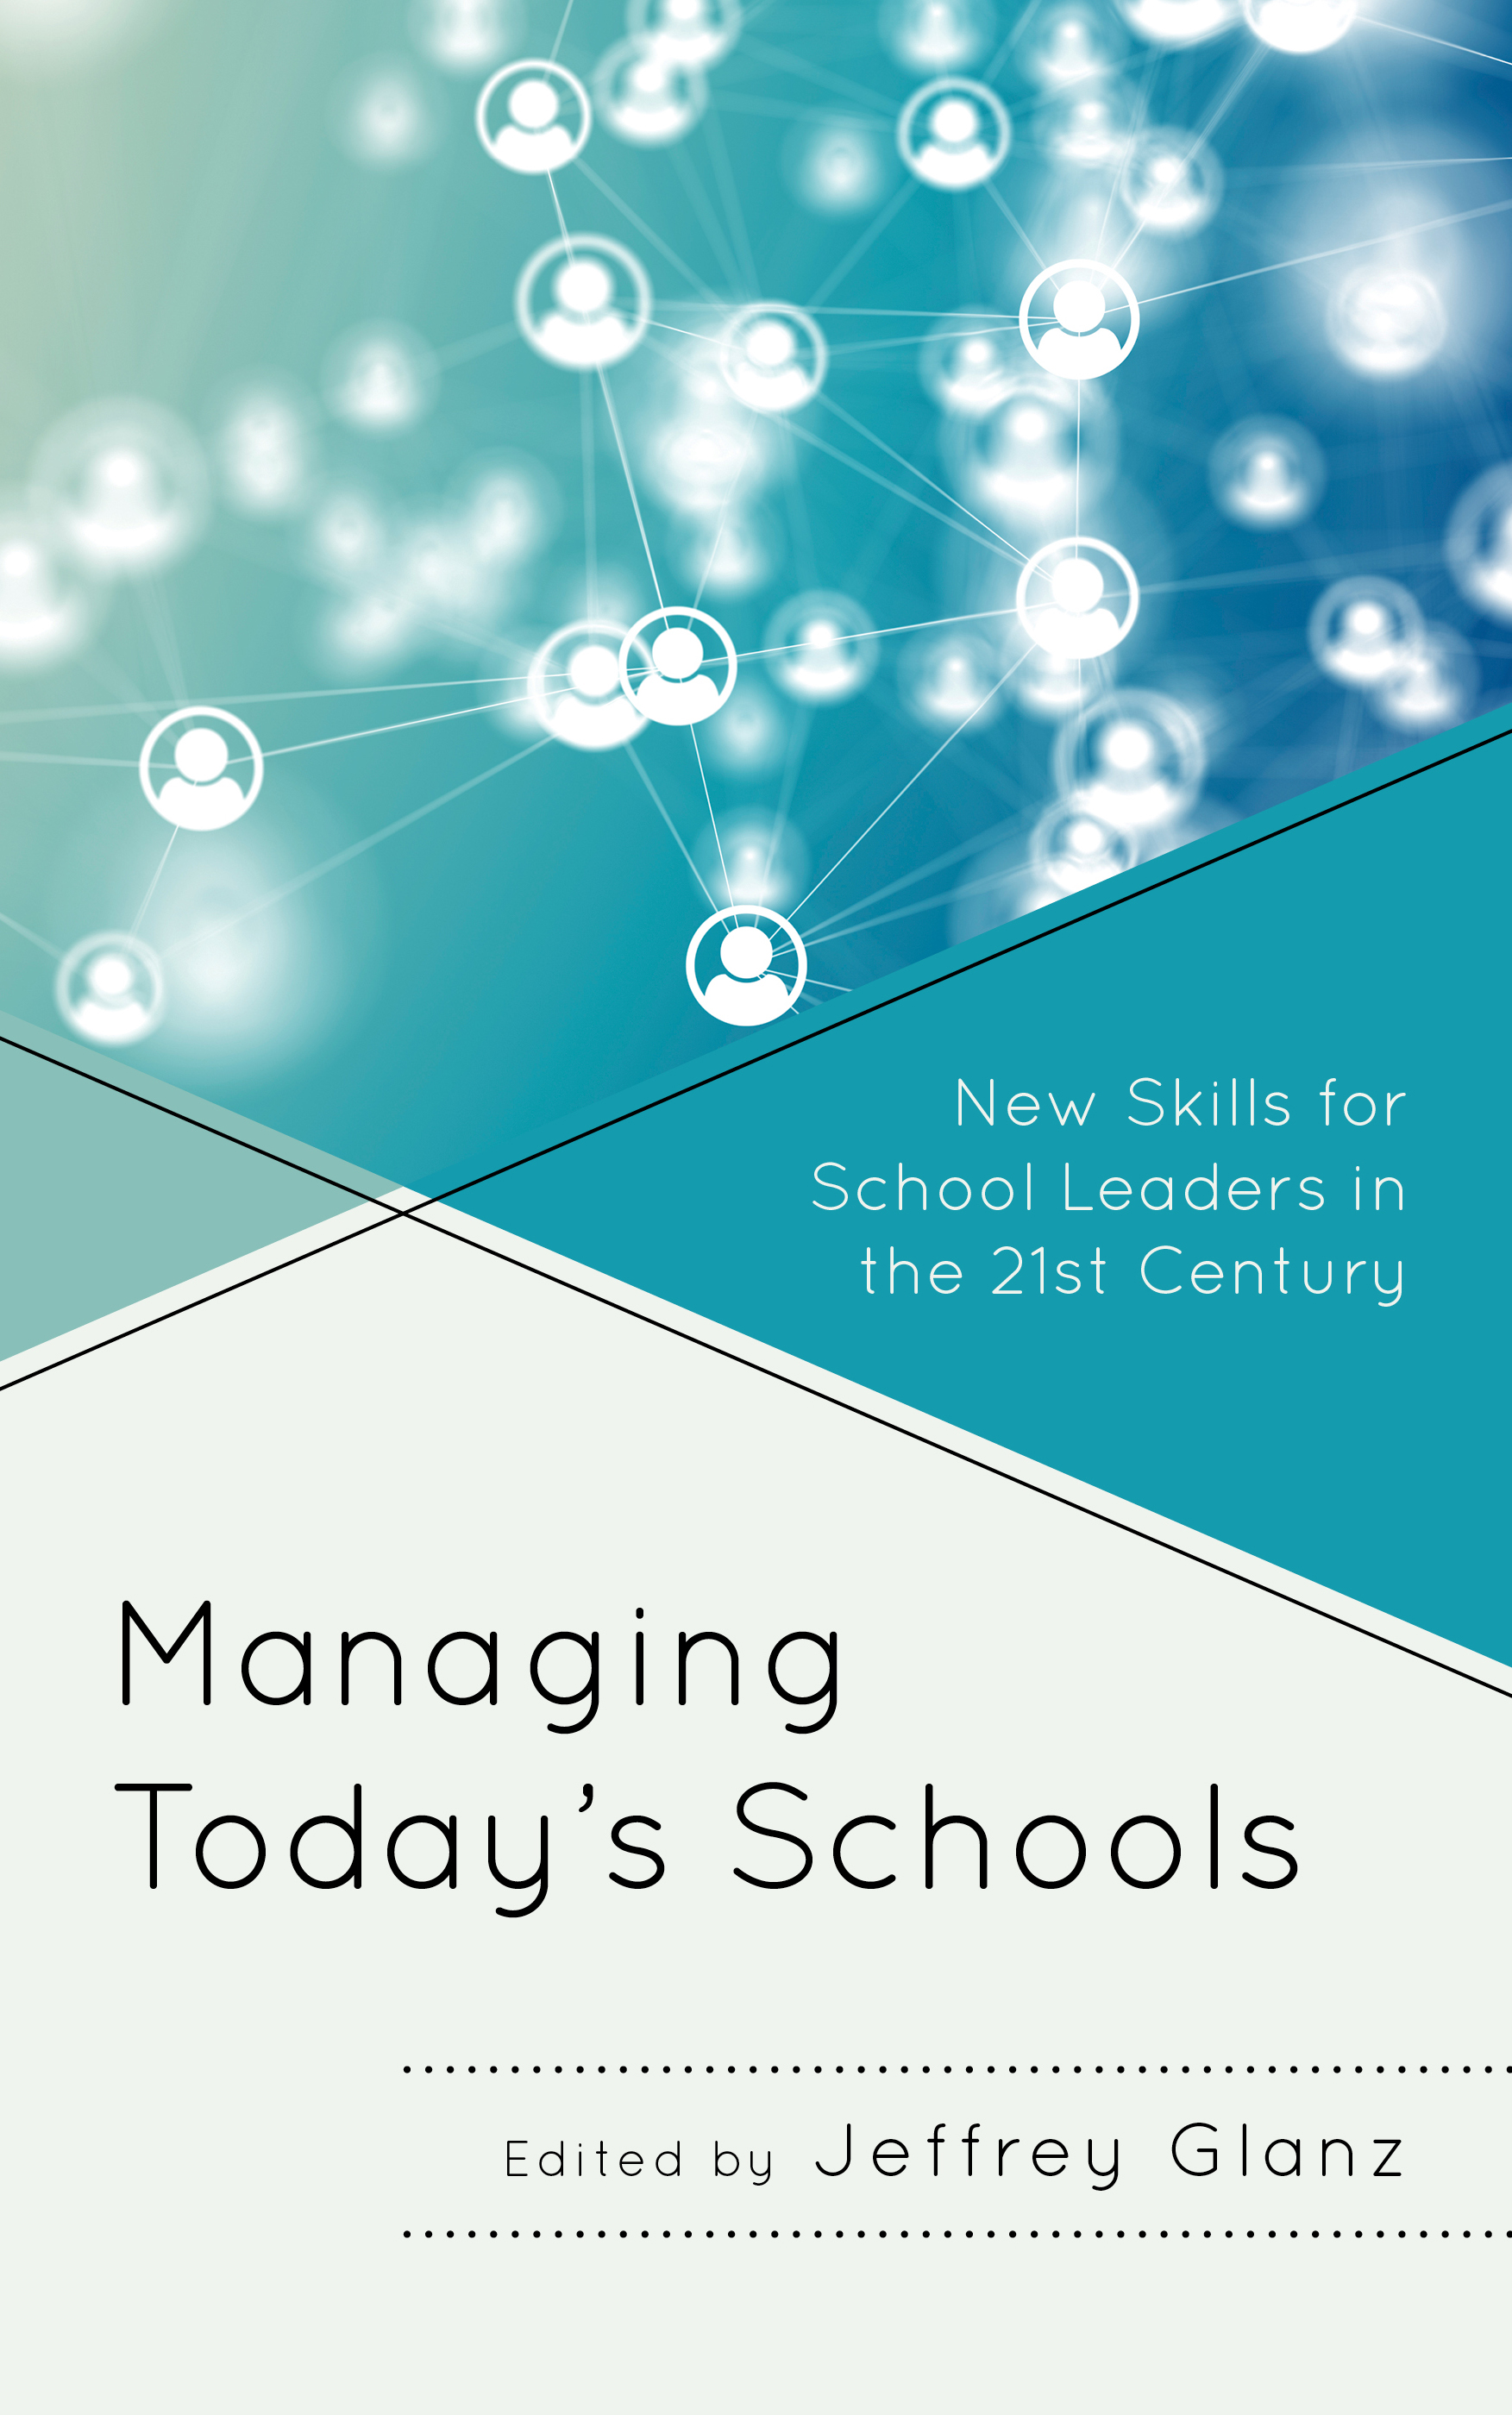 Managing Today’s Schools: New Skills for School Leaders in the 21st Century